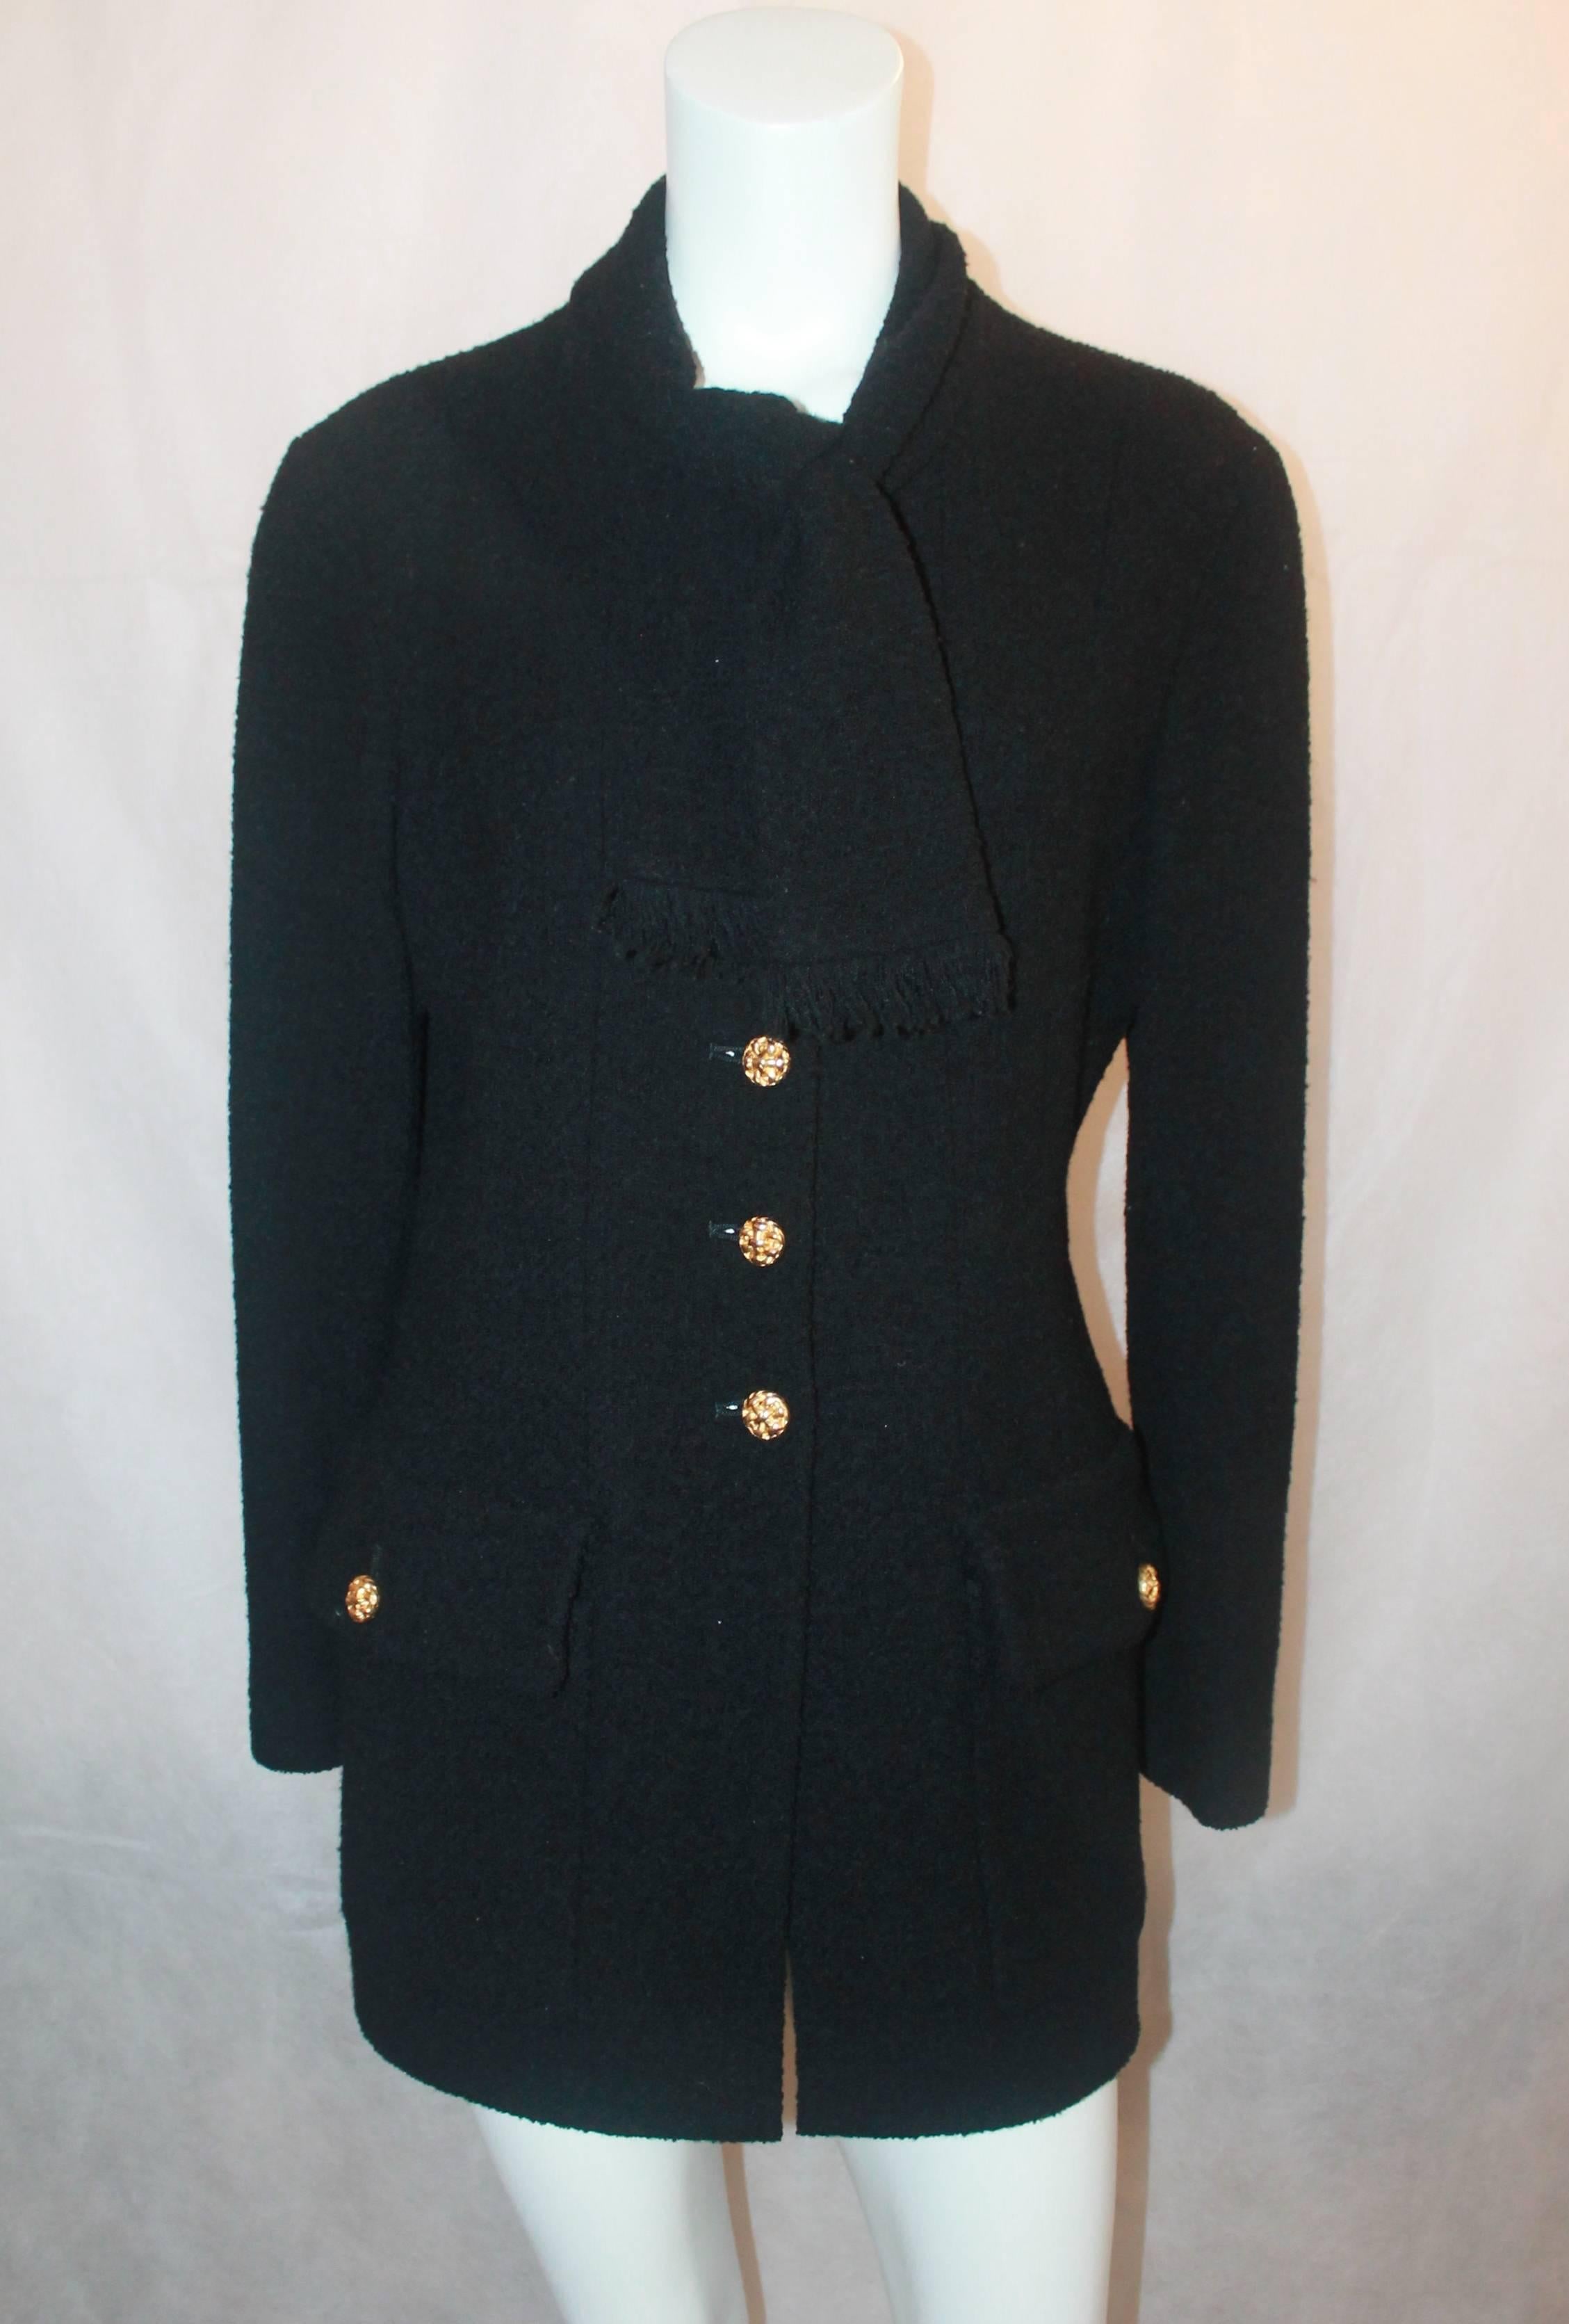 Chanel Vintage Black Wool Long Jacket with Neck Tie - 40 - circa 1980's. This jacket is in excellent condition and is a classic, staple Chanel piece. This lovely jacket features an attached neck tie, 2 front pockets, goldtone woven-like buttons, and